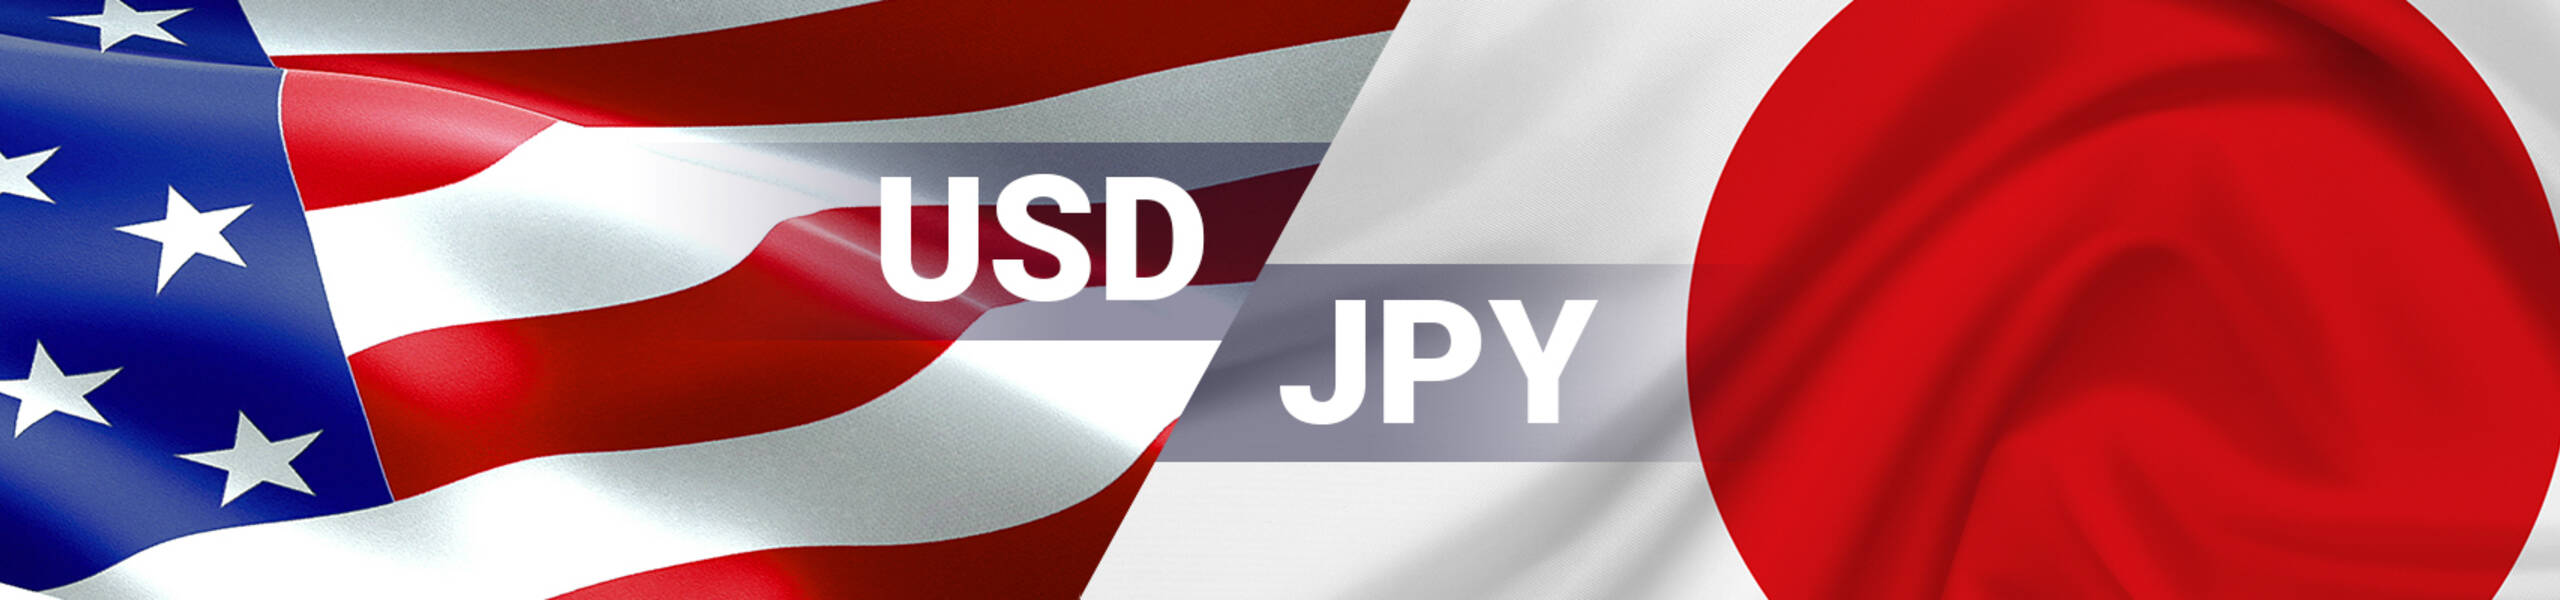 USD/JPY: unstoppable bears